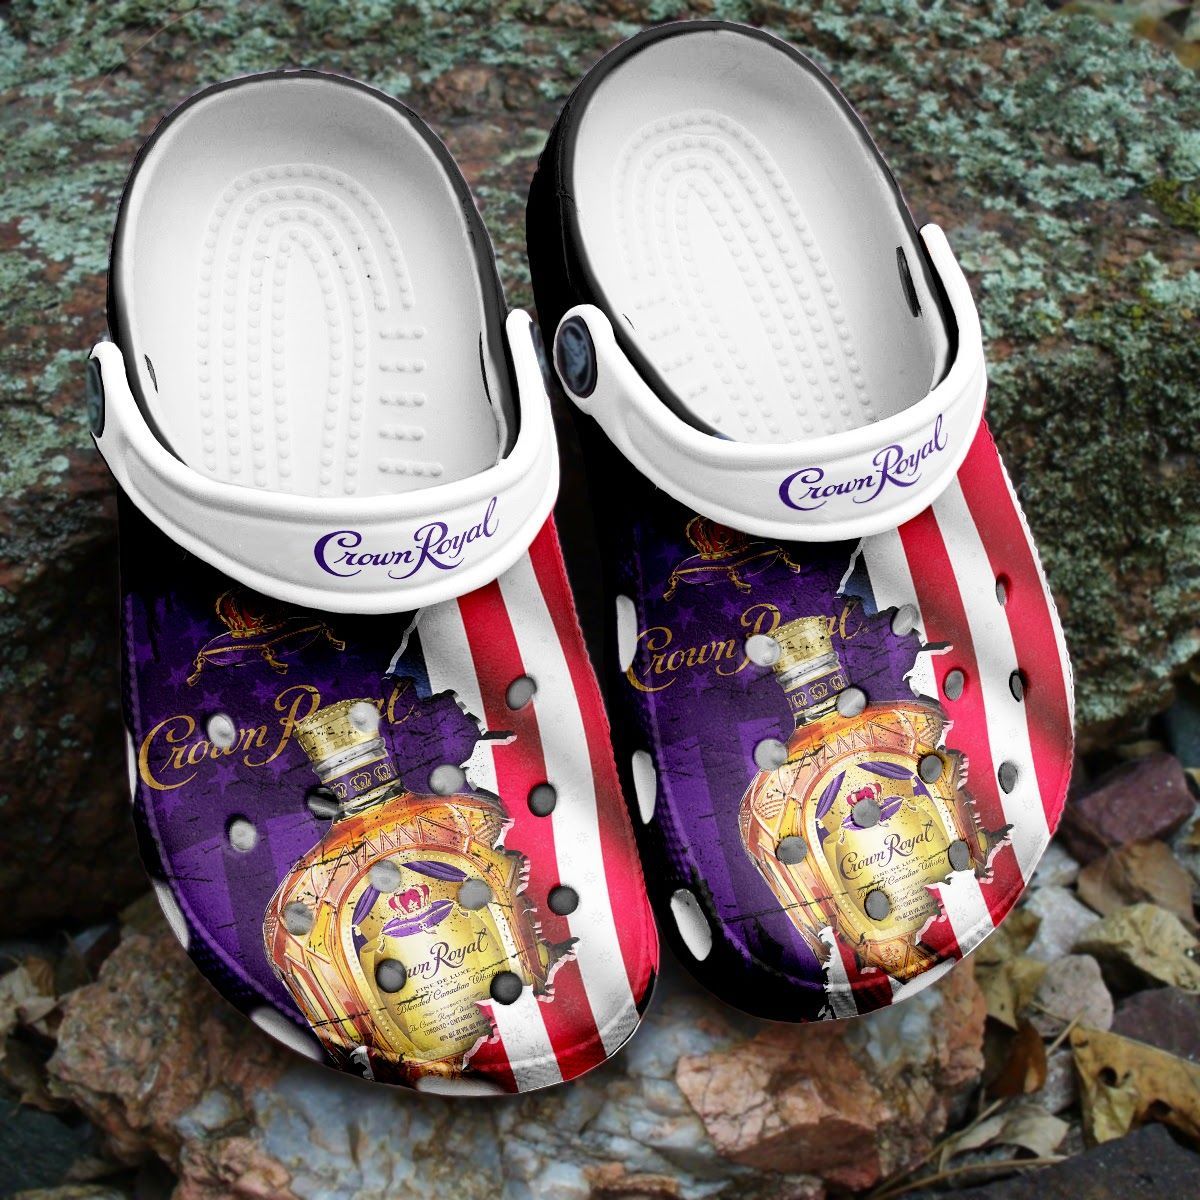 If you'd like to purchase a pair of Crocband Clogs, be sure to check out the official website. 92